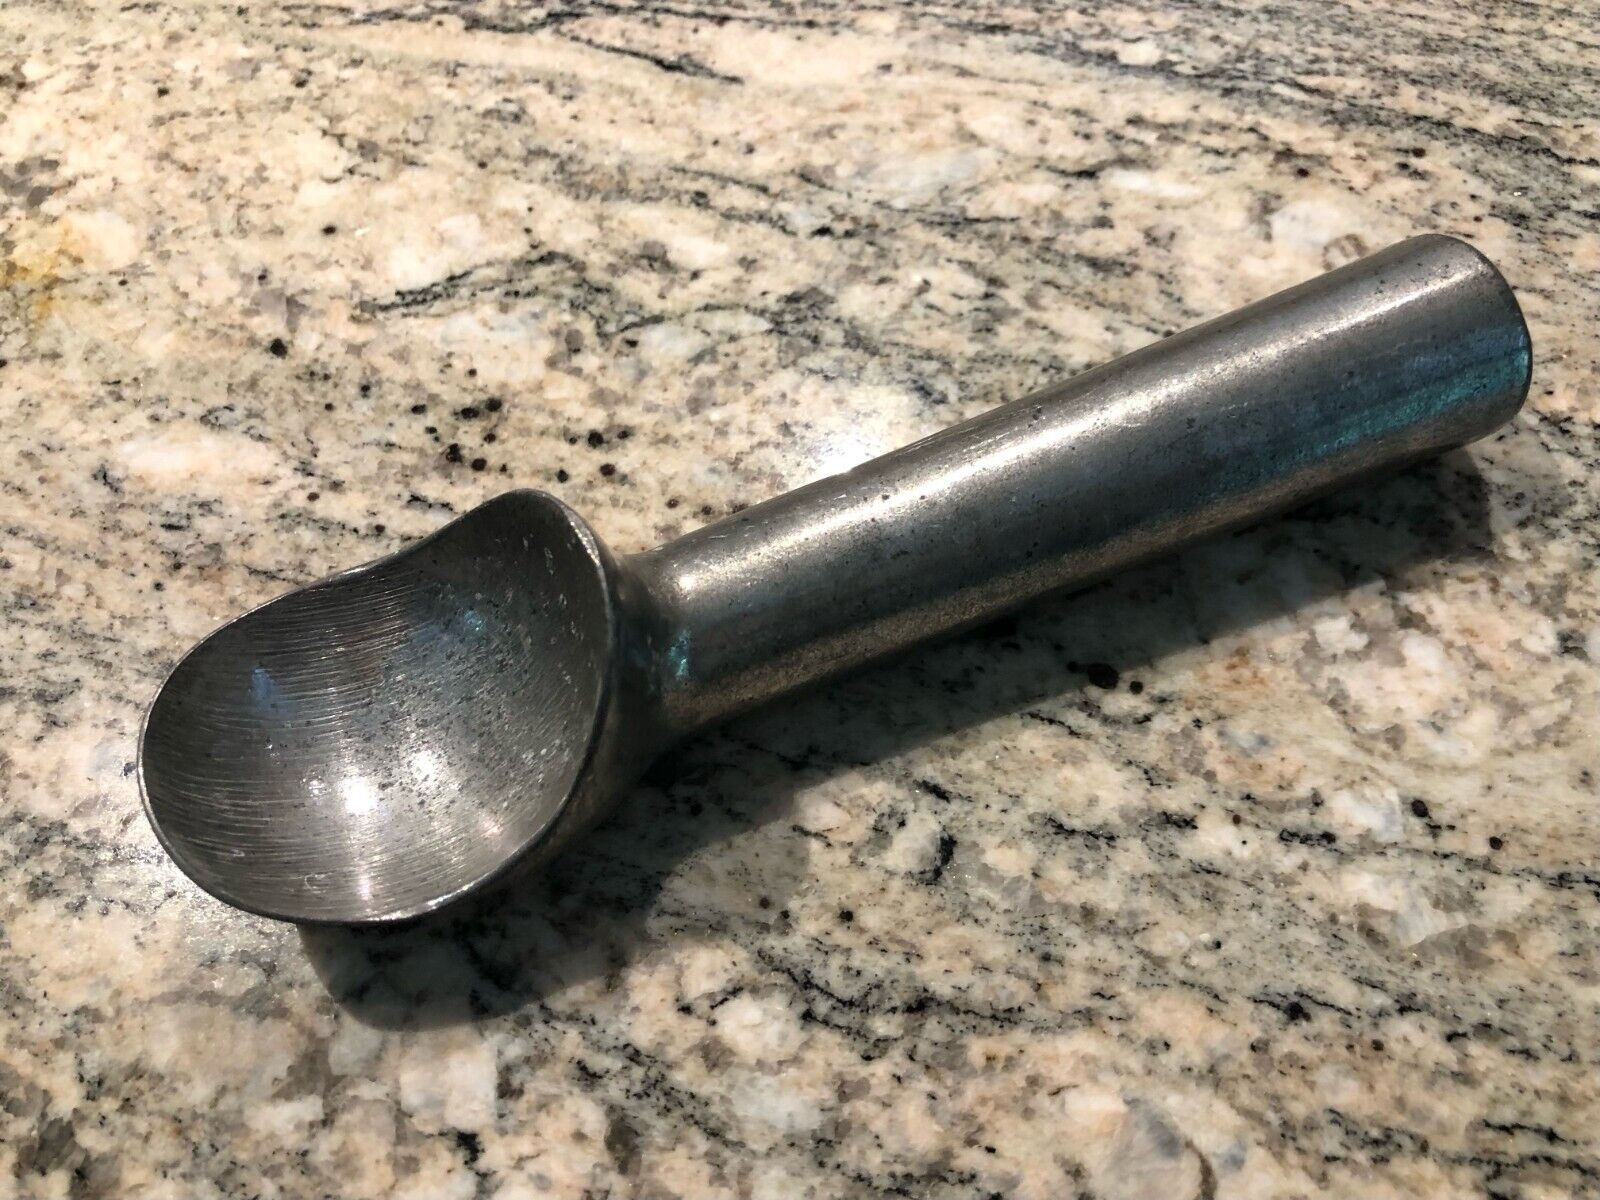 Retired PAMPERED CHEF Aluminum Liquid Filled Ice Cream Scoop - Works well NICE